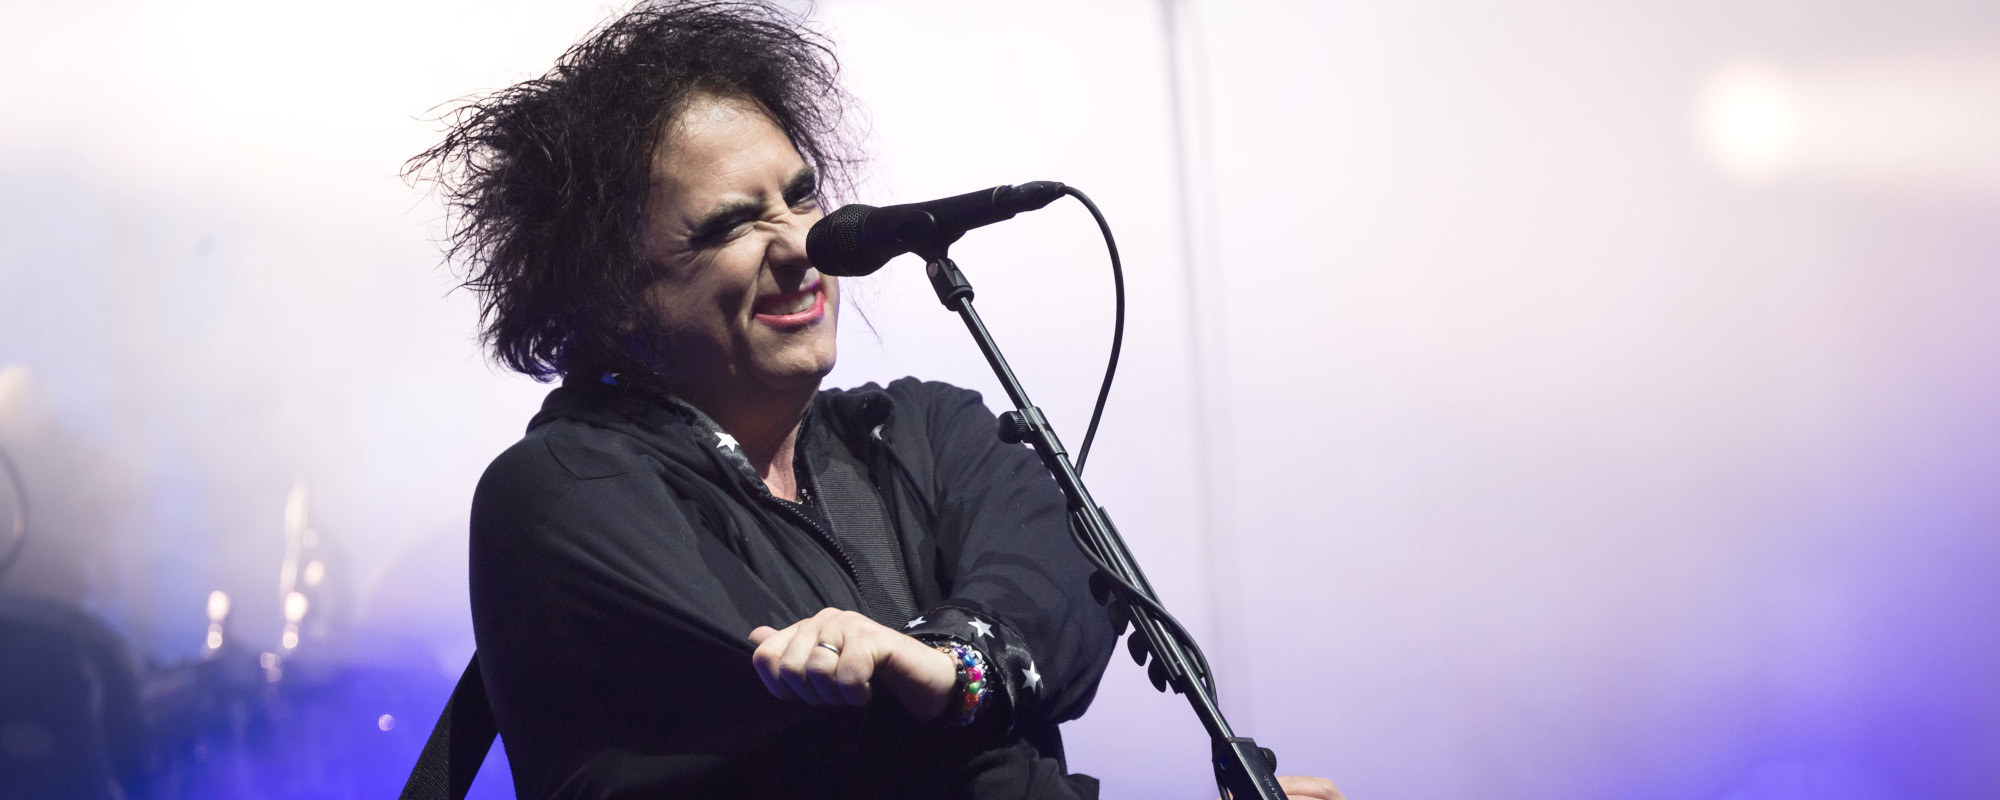 The Meaning Behind “In Between Days” by The Cure and How It Brought the Band to New Levels of Popularity